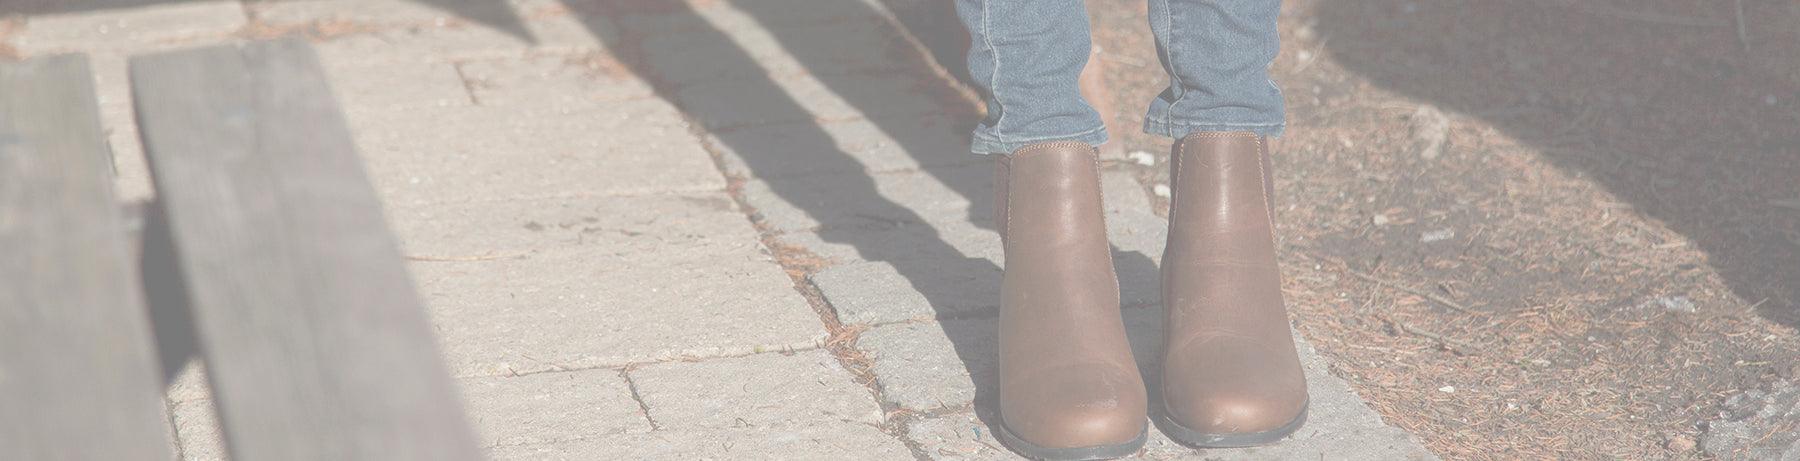 Chelsea Boots For Women - Comfy Moda US